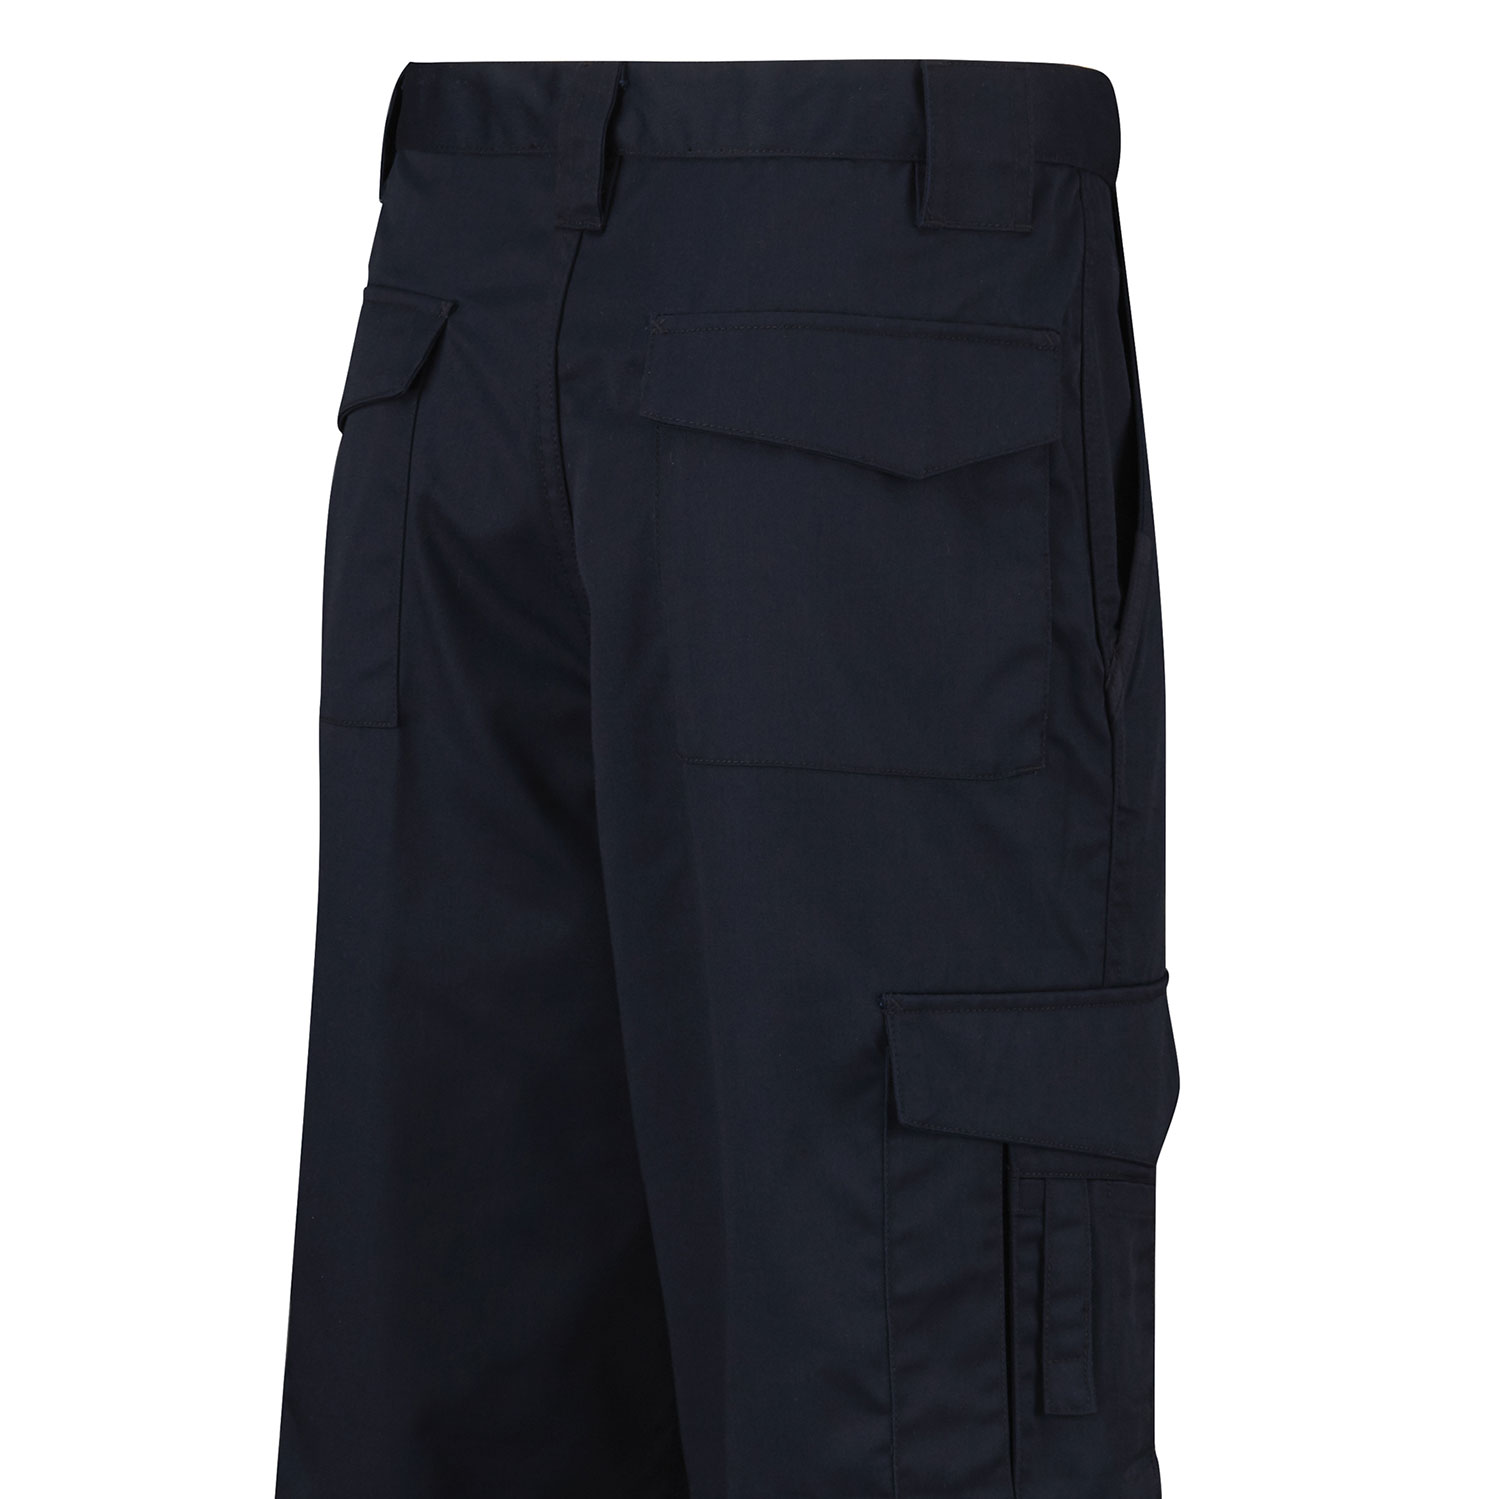 Propper Critical Response Twill EMS Pants